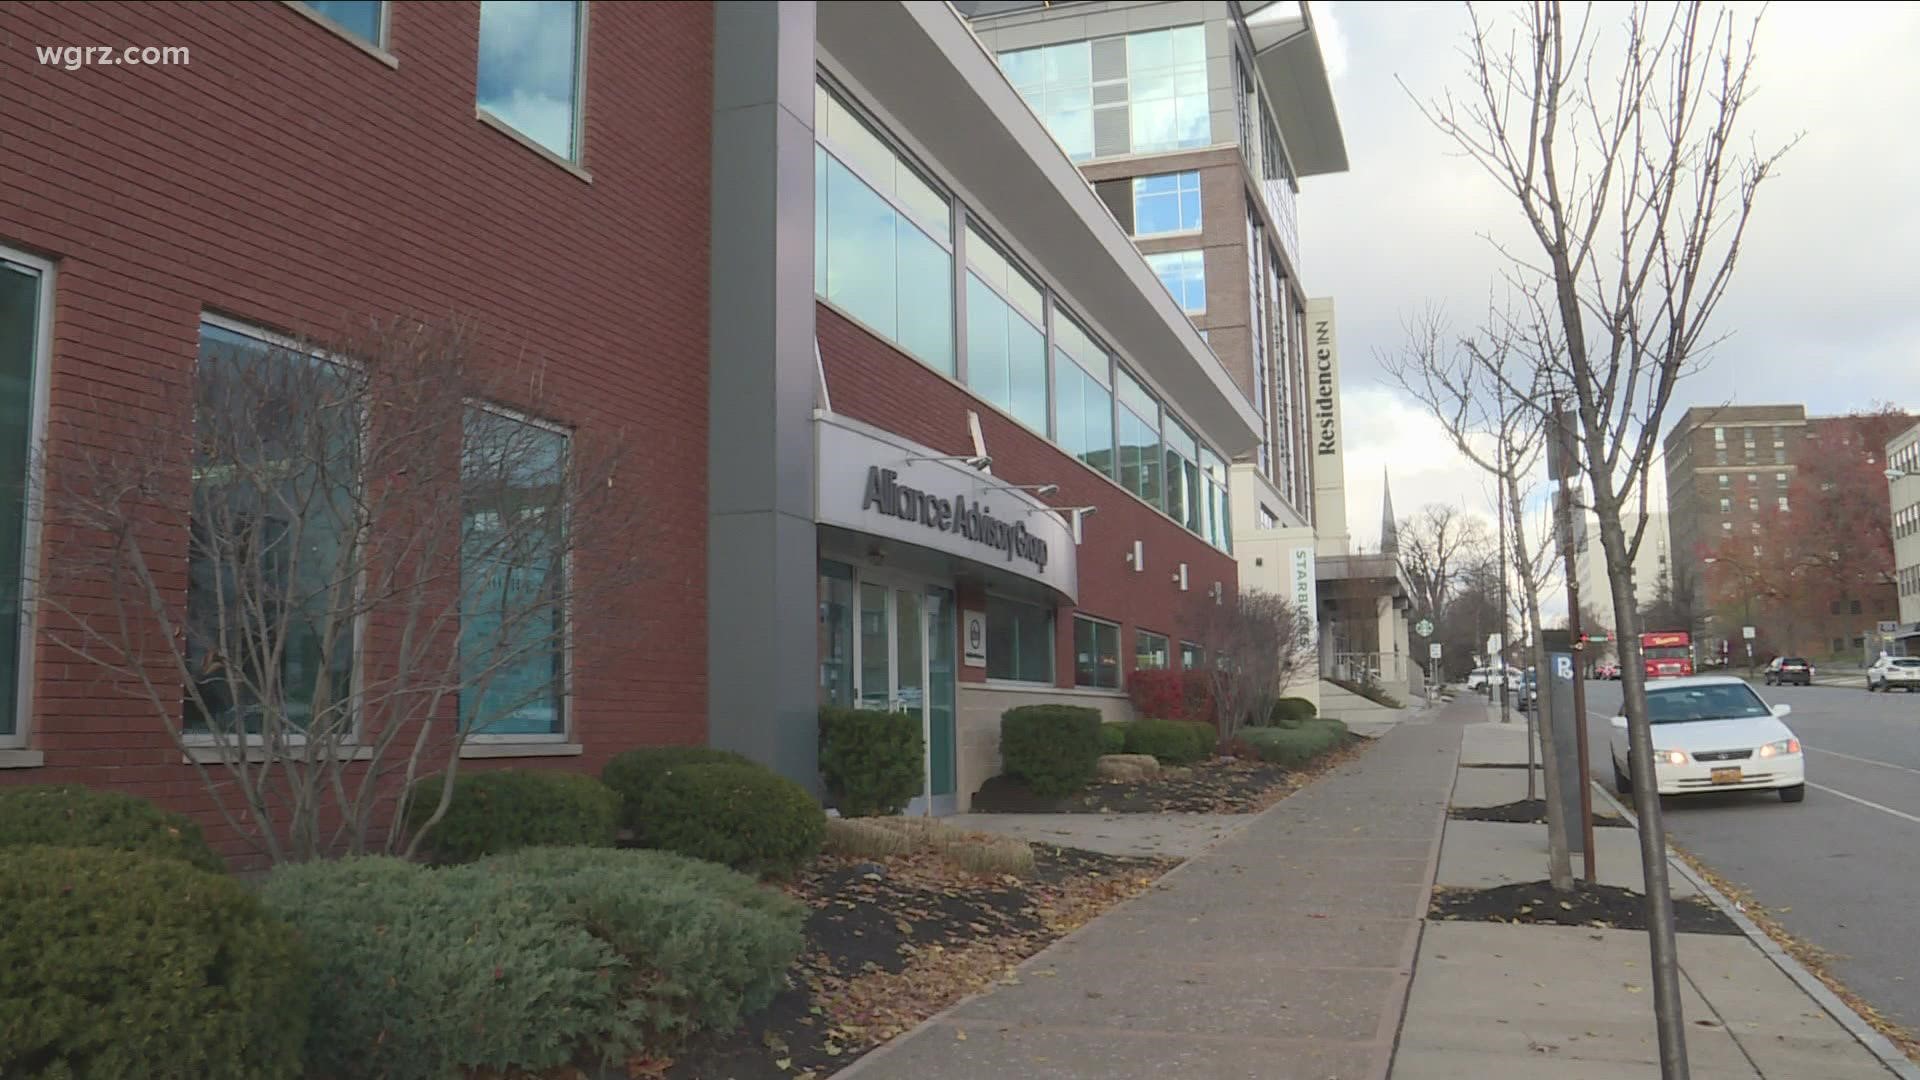 We've all heard the saying "not in my backyard." 
That's what some Allentown residents are saying about a plan for a private outpatient center.